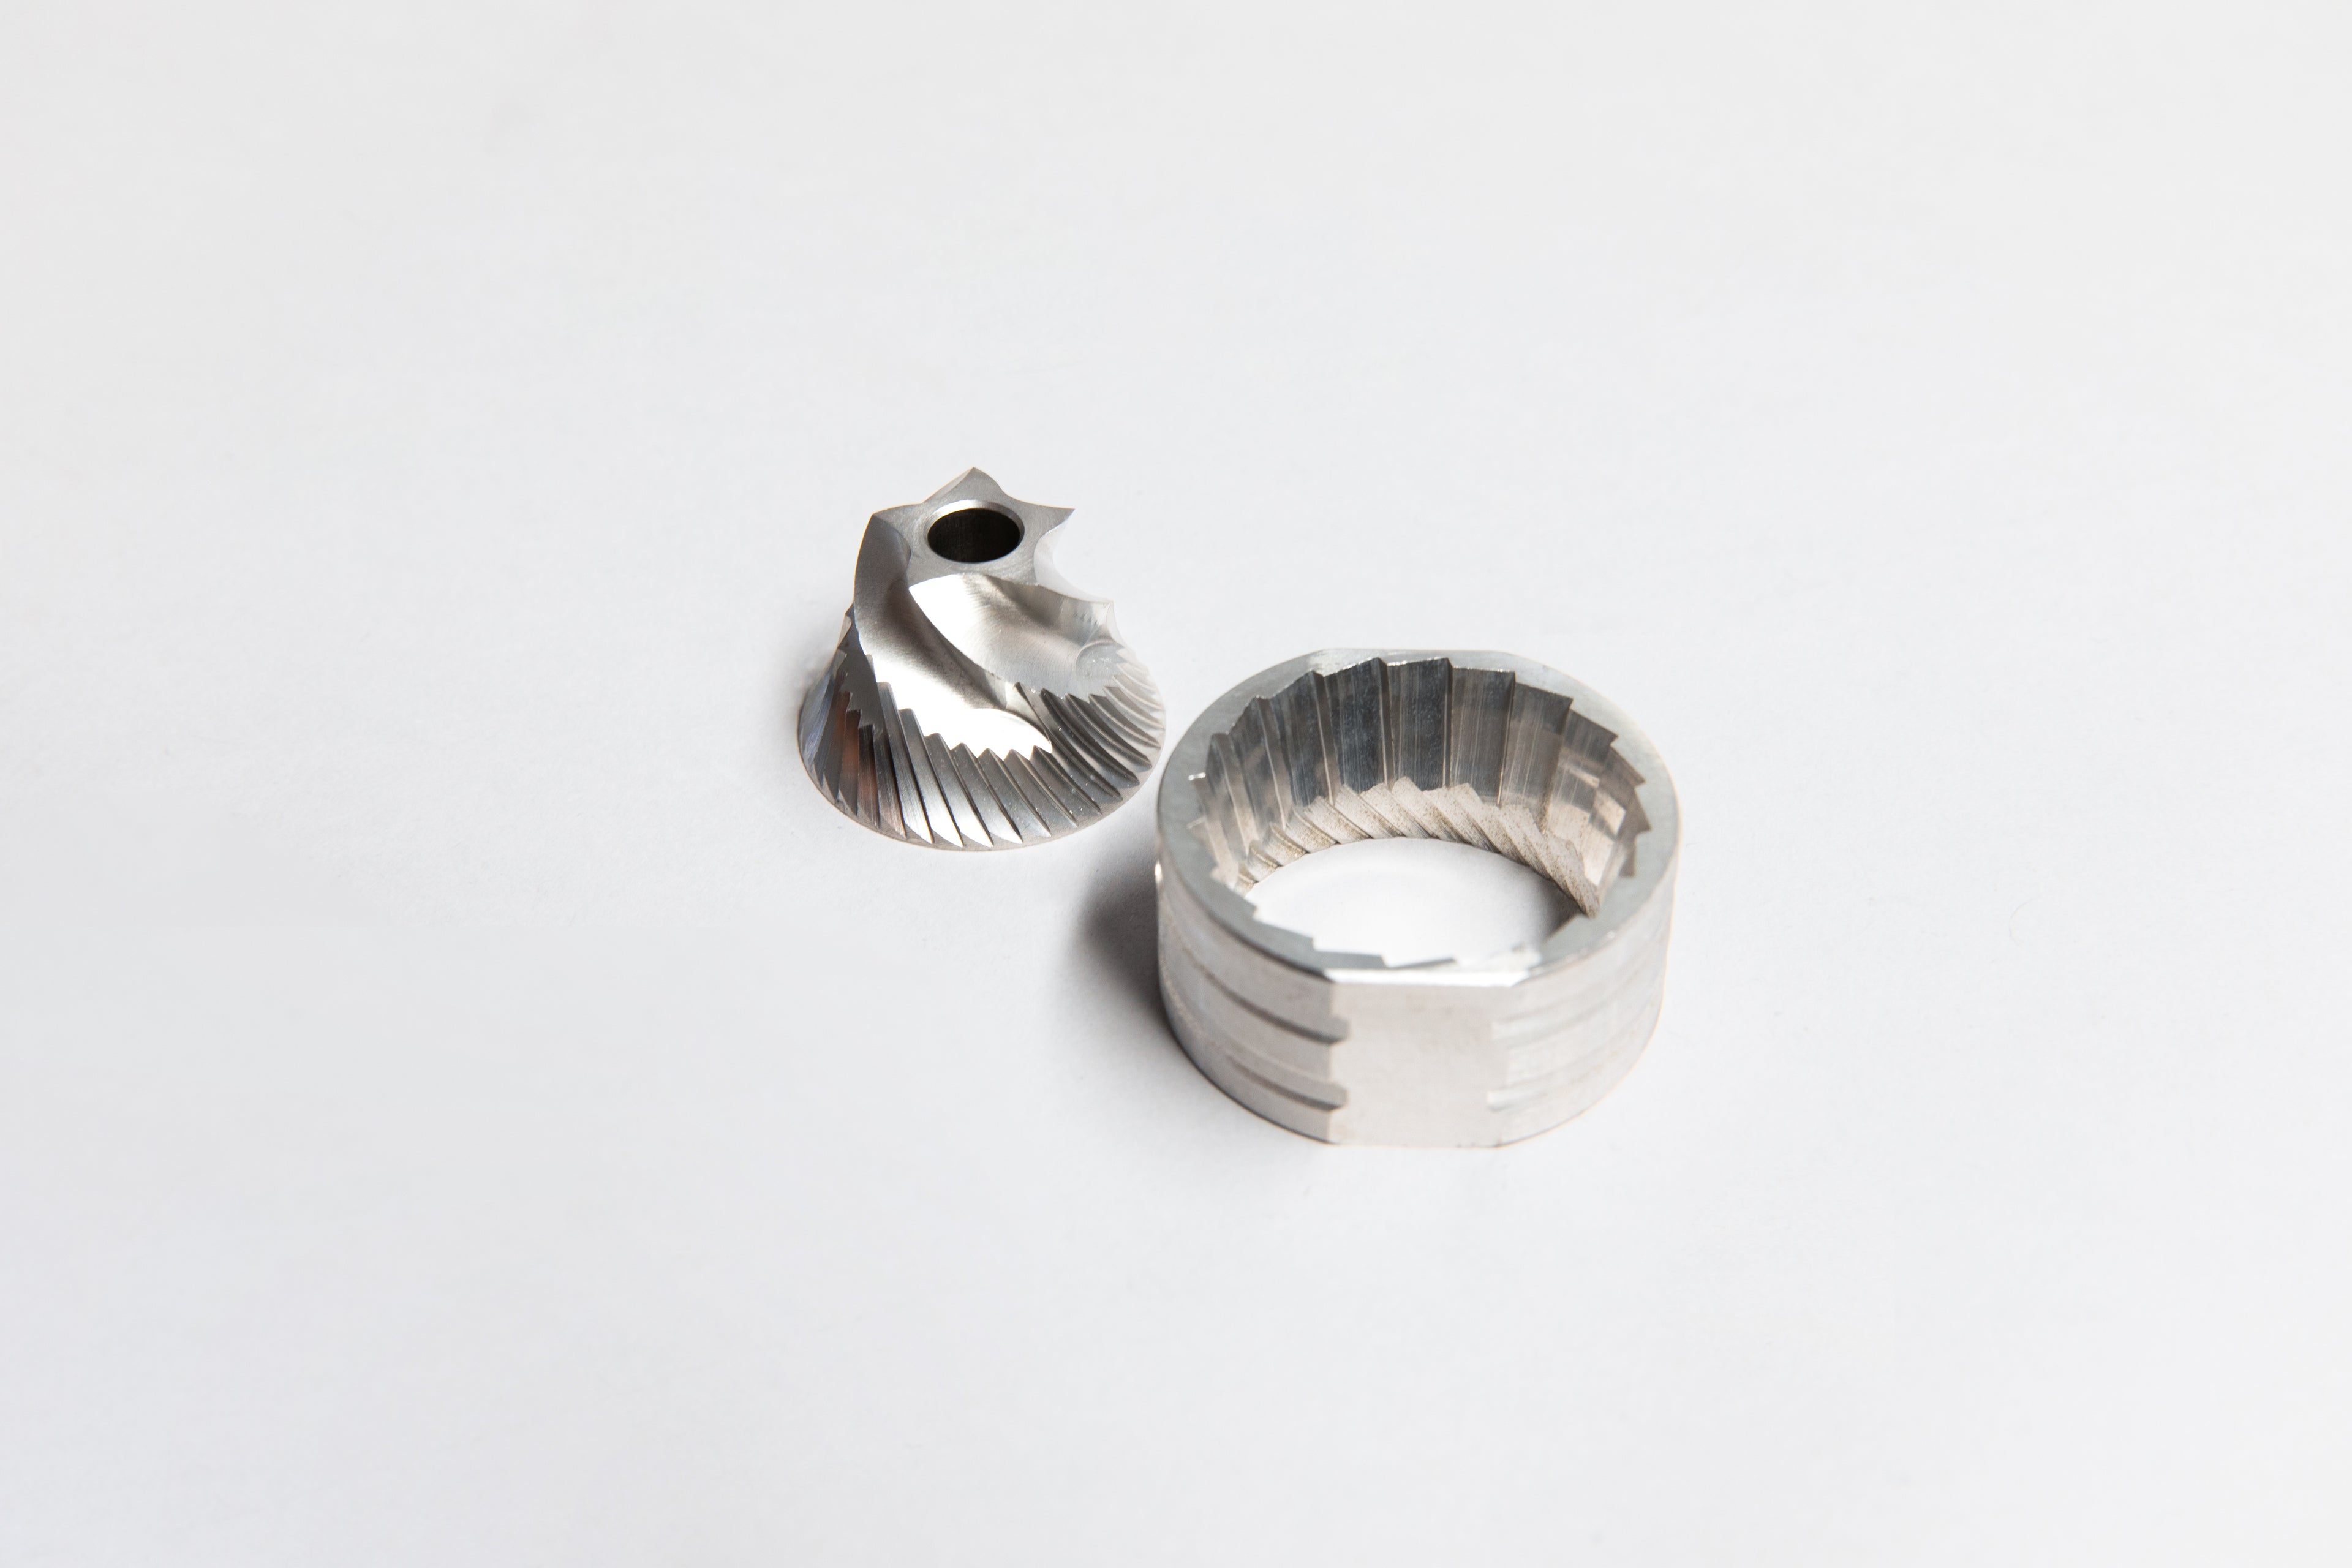 Stainless steel cone shaped inner and circular shaped outer burrs.